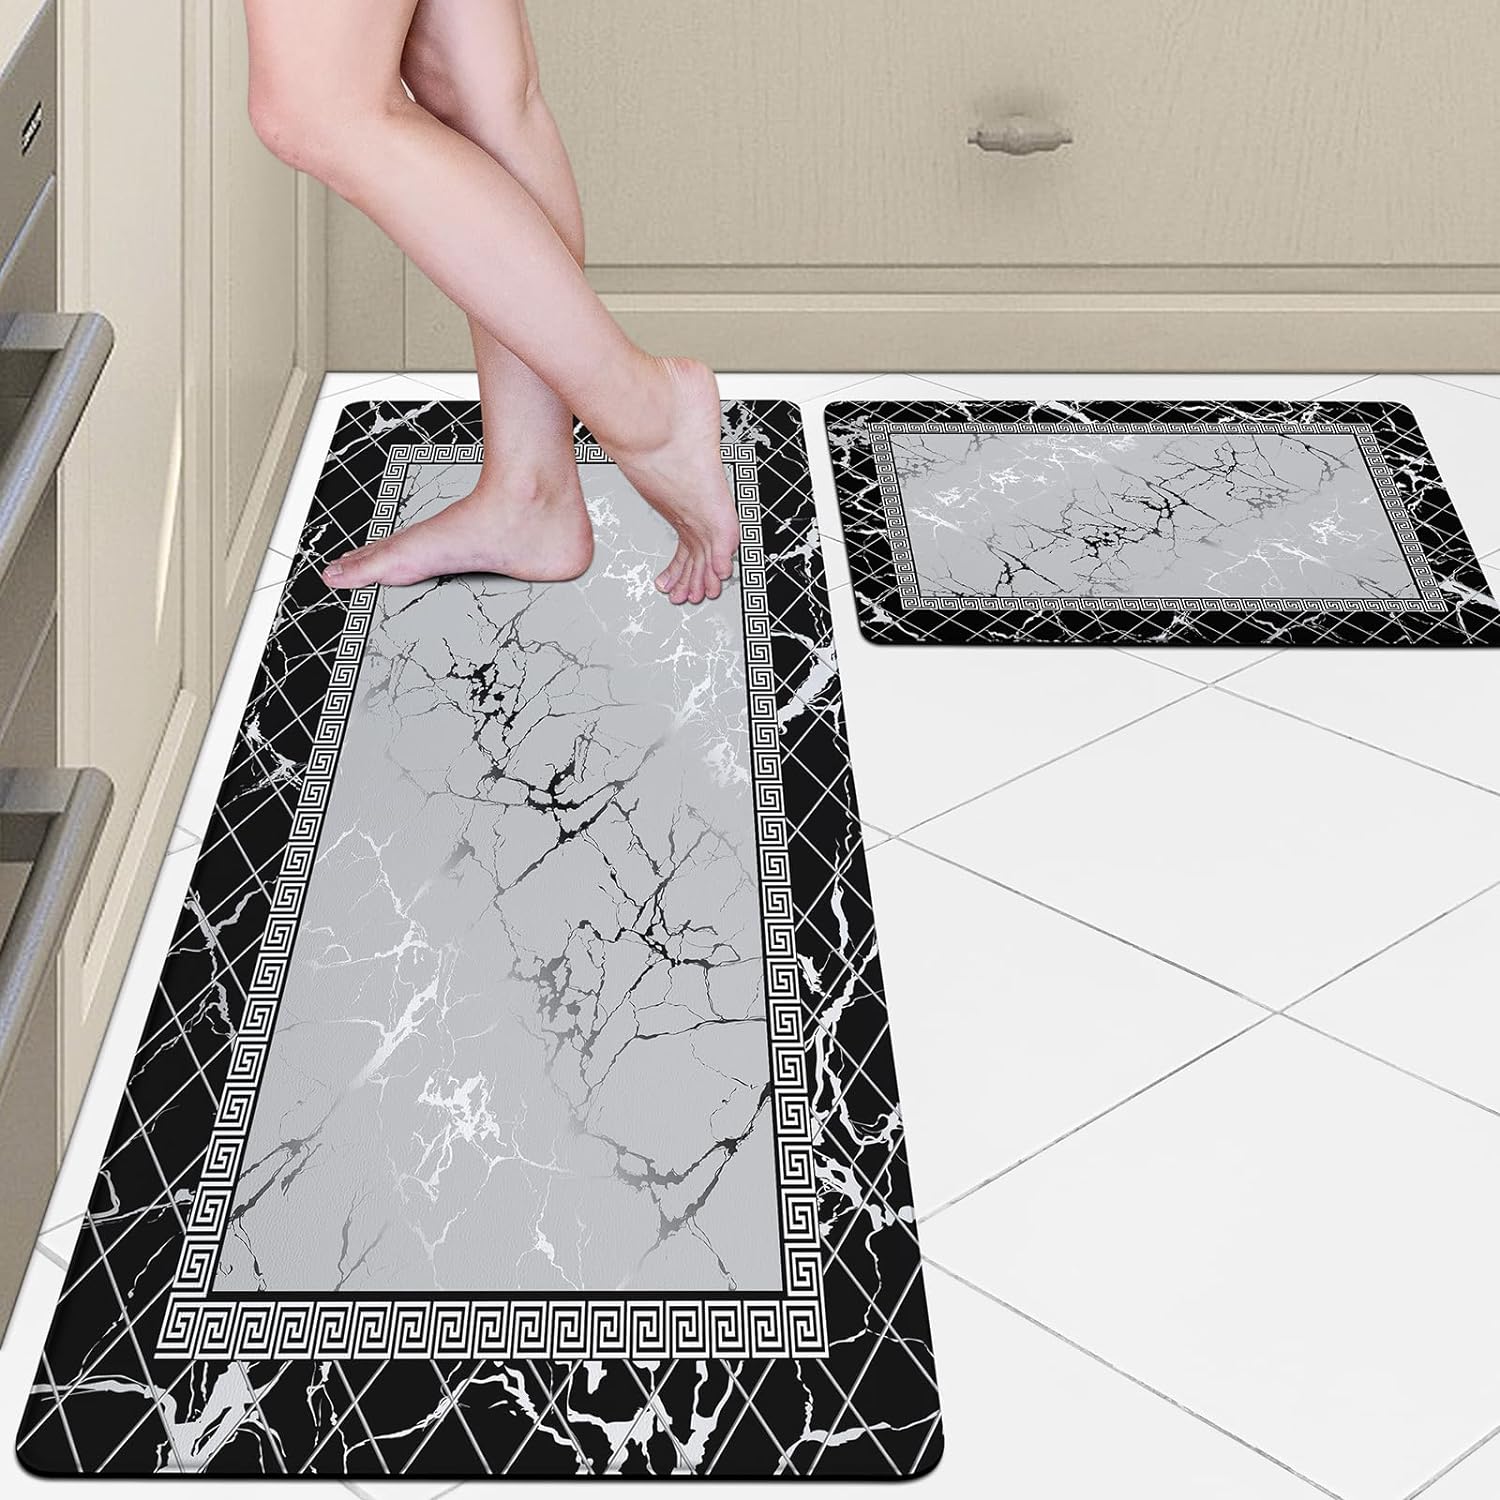 Black Marble Kitchen Mats Anti Fatigue Cushioned Kitchen Rugs Sets of 2 Washable Kitchen Floor Mats Non Slip Waterproof Standing Mat for Kitchen Decor Sink Laundry Office